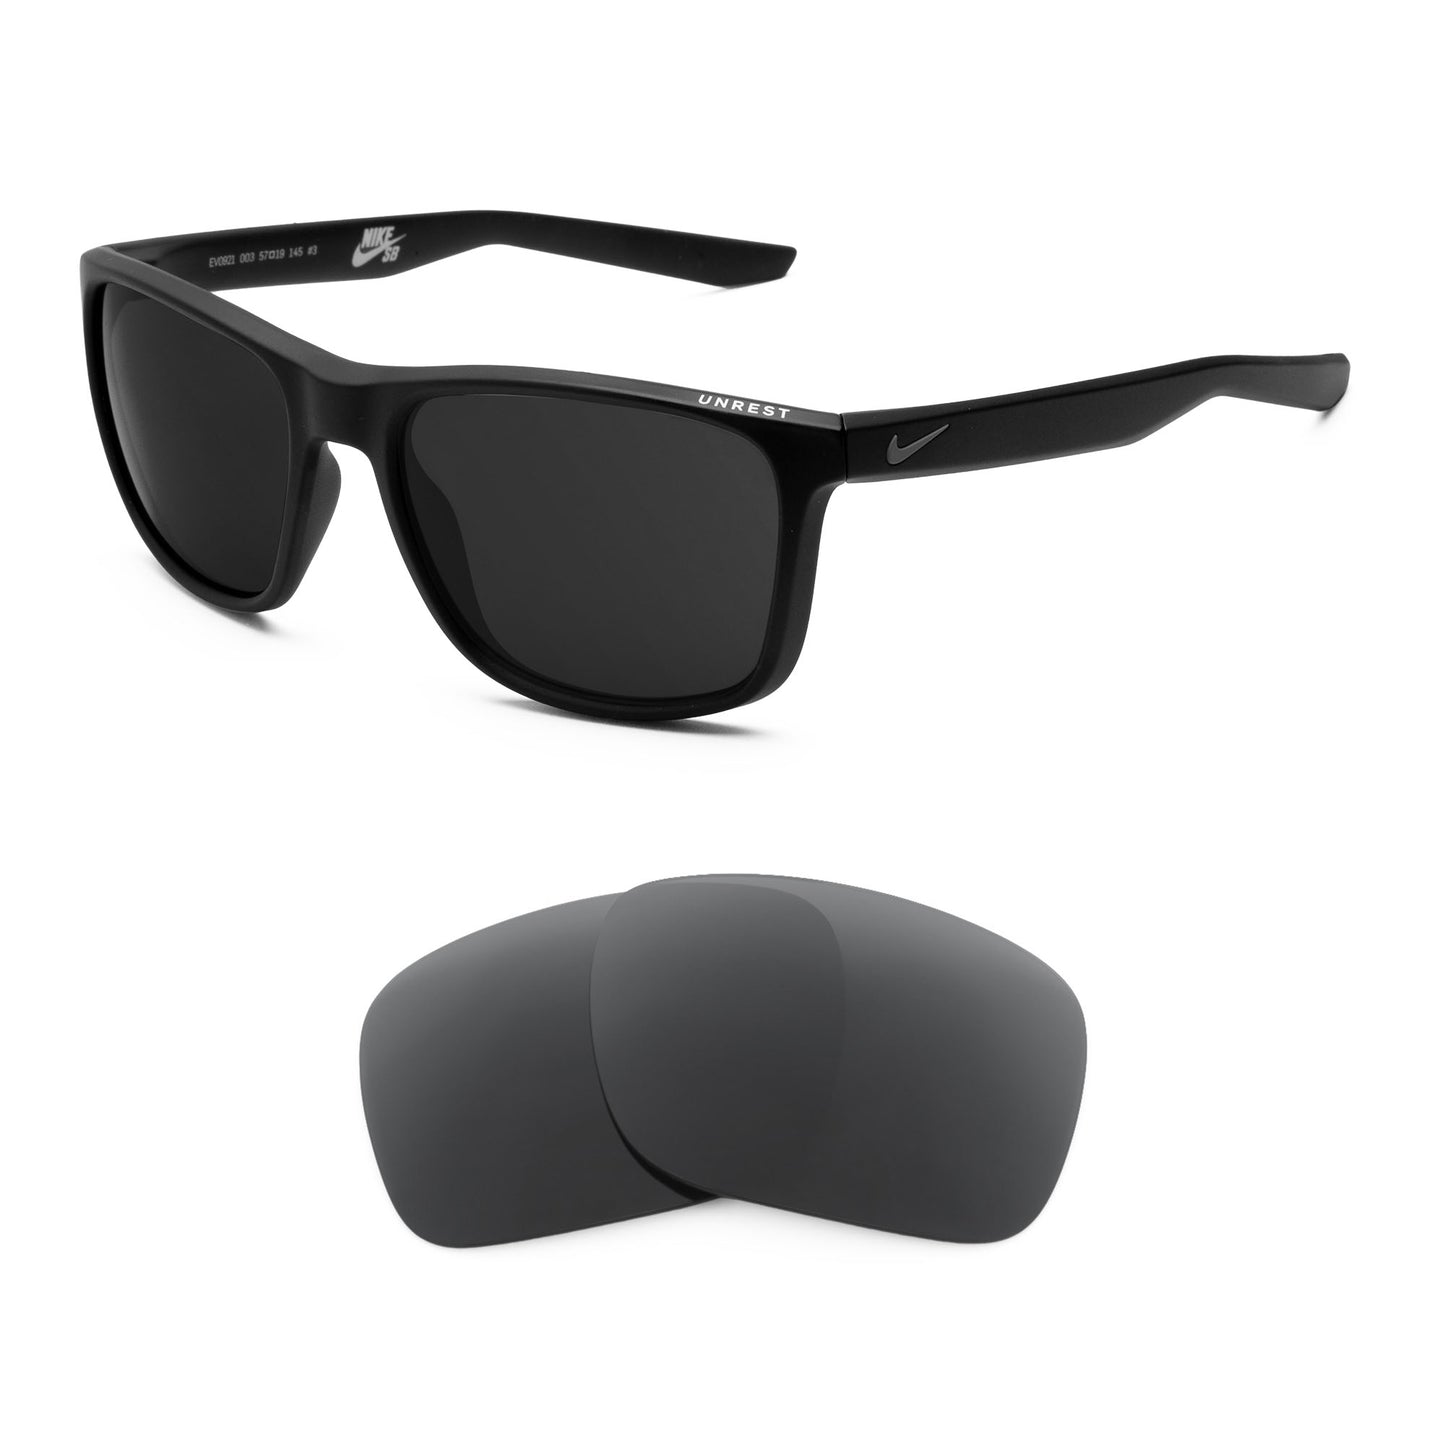 Nike Unrest sunglasses with replacement lenses